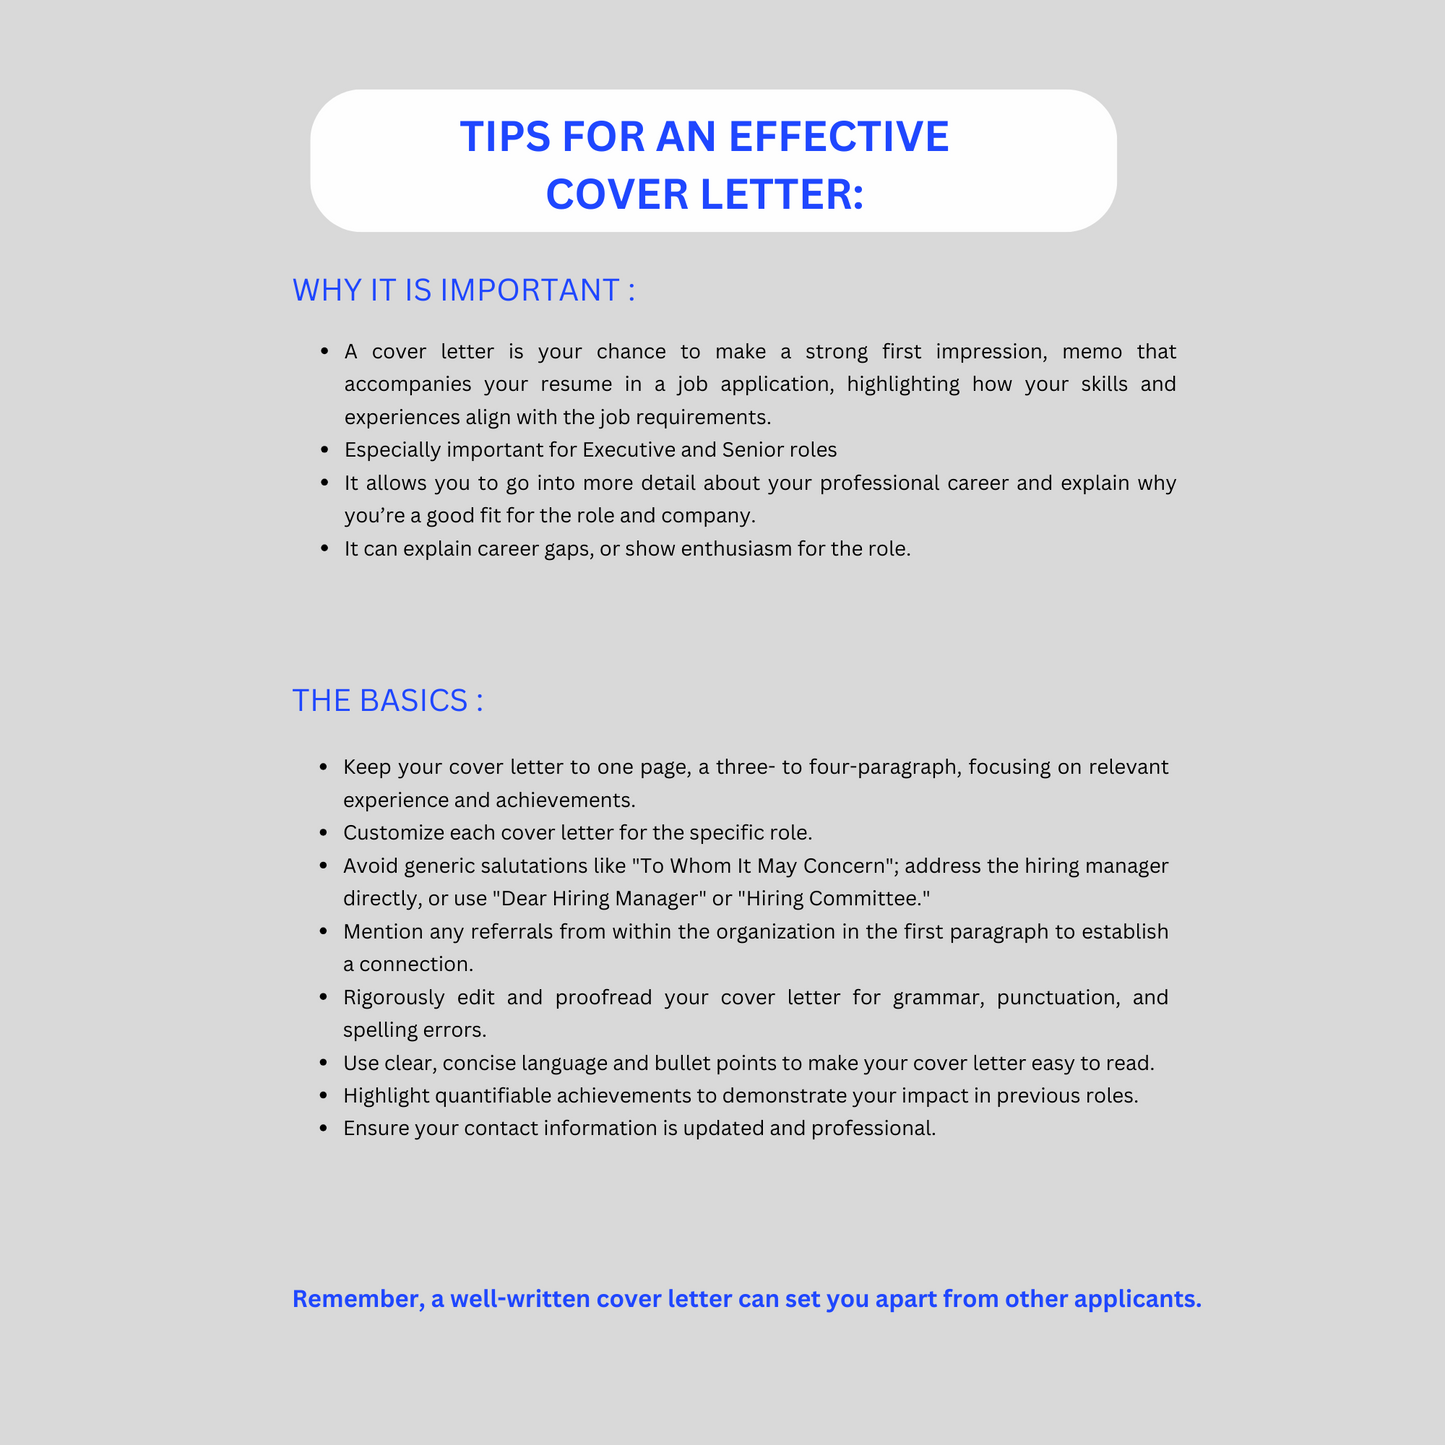 Top 10 ATS compatible Cover Letter Templates + Tips